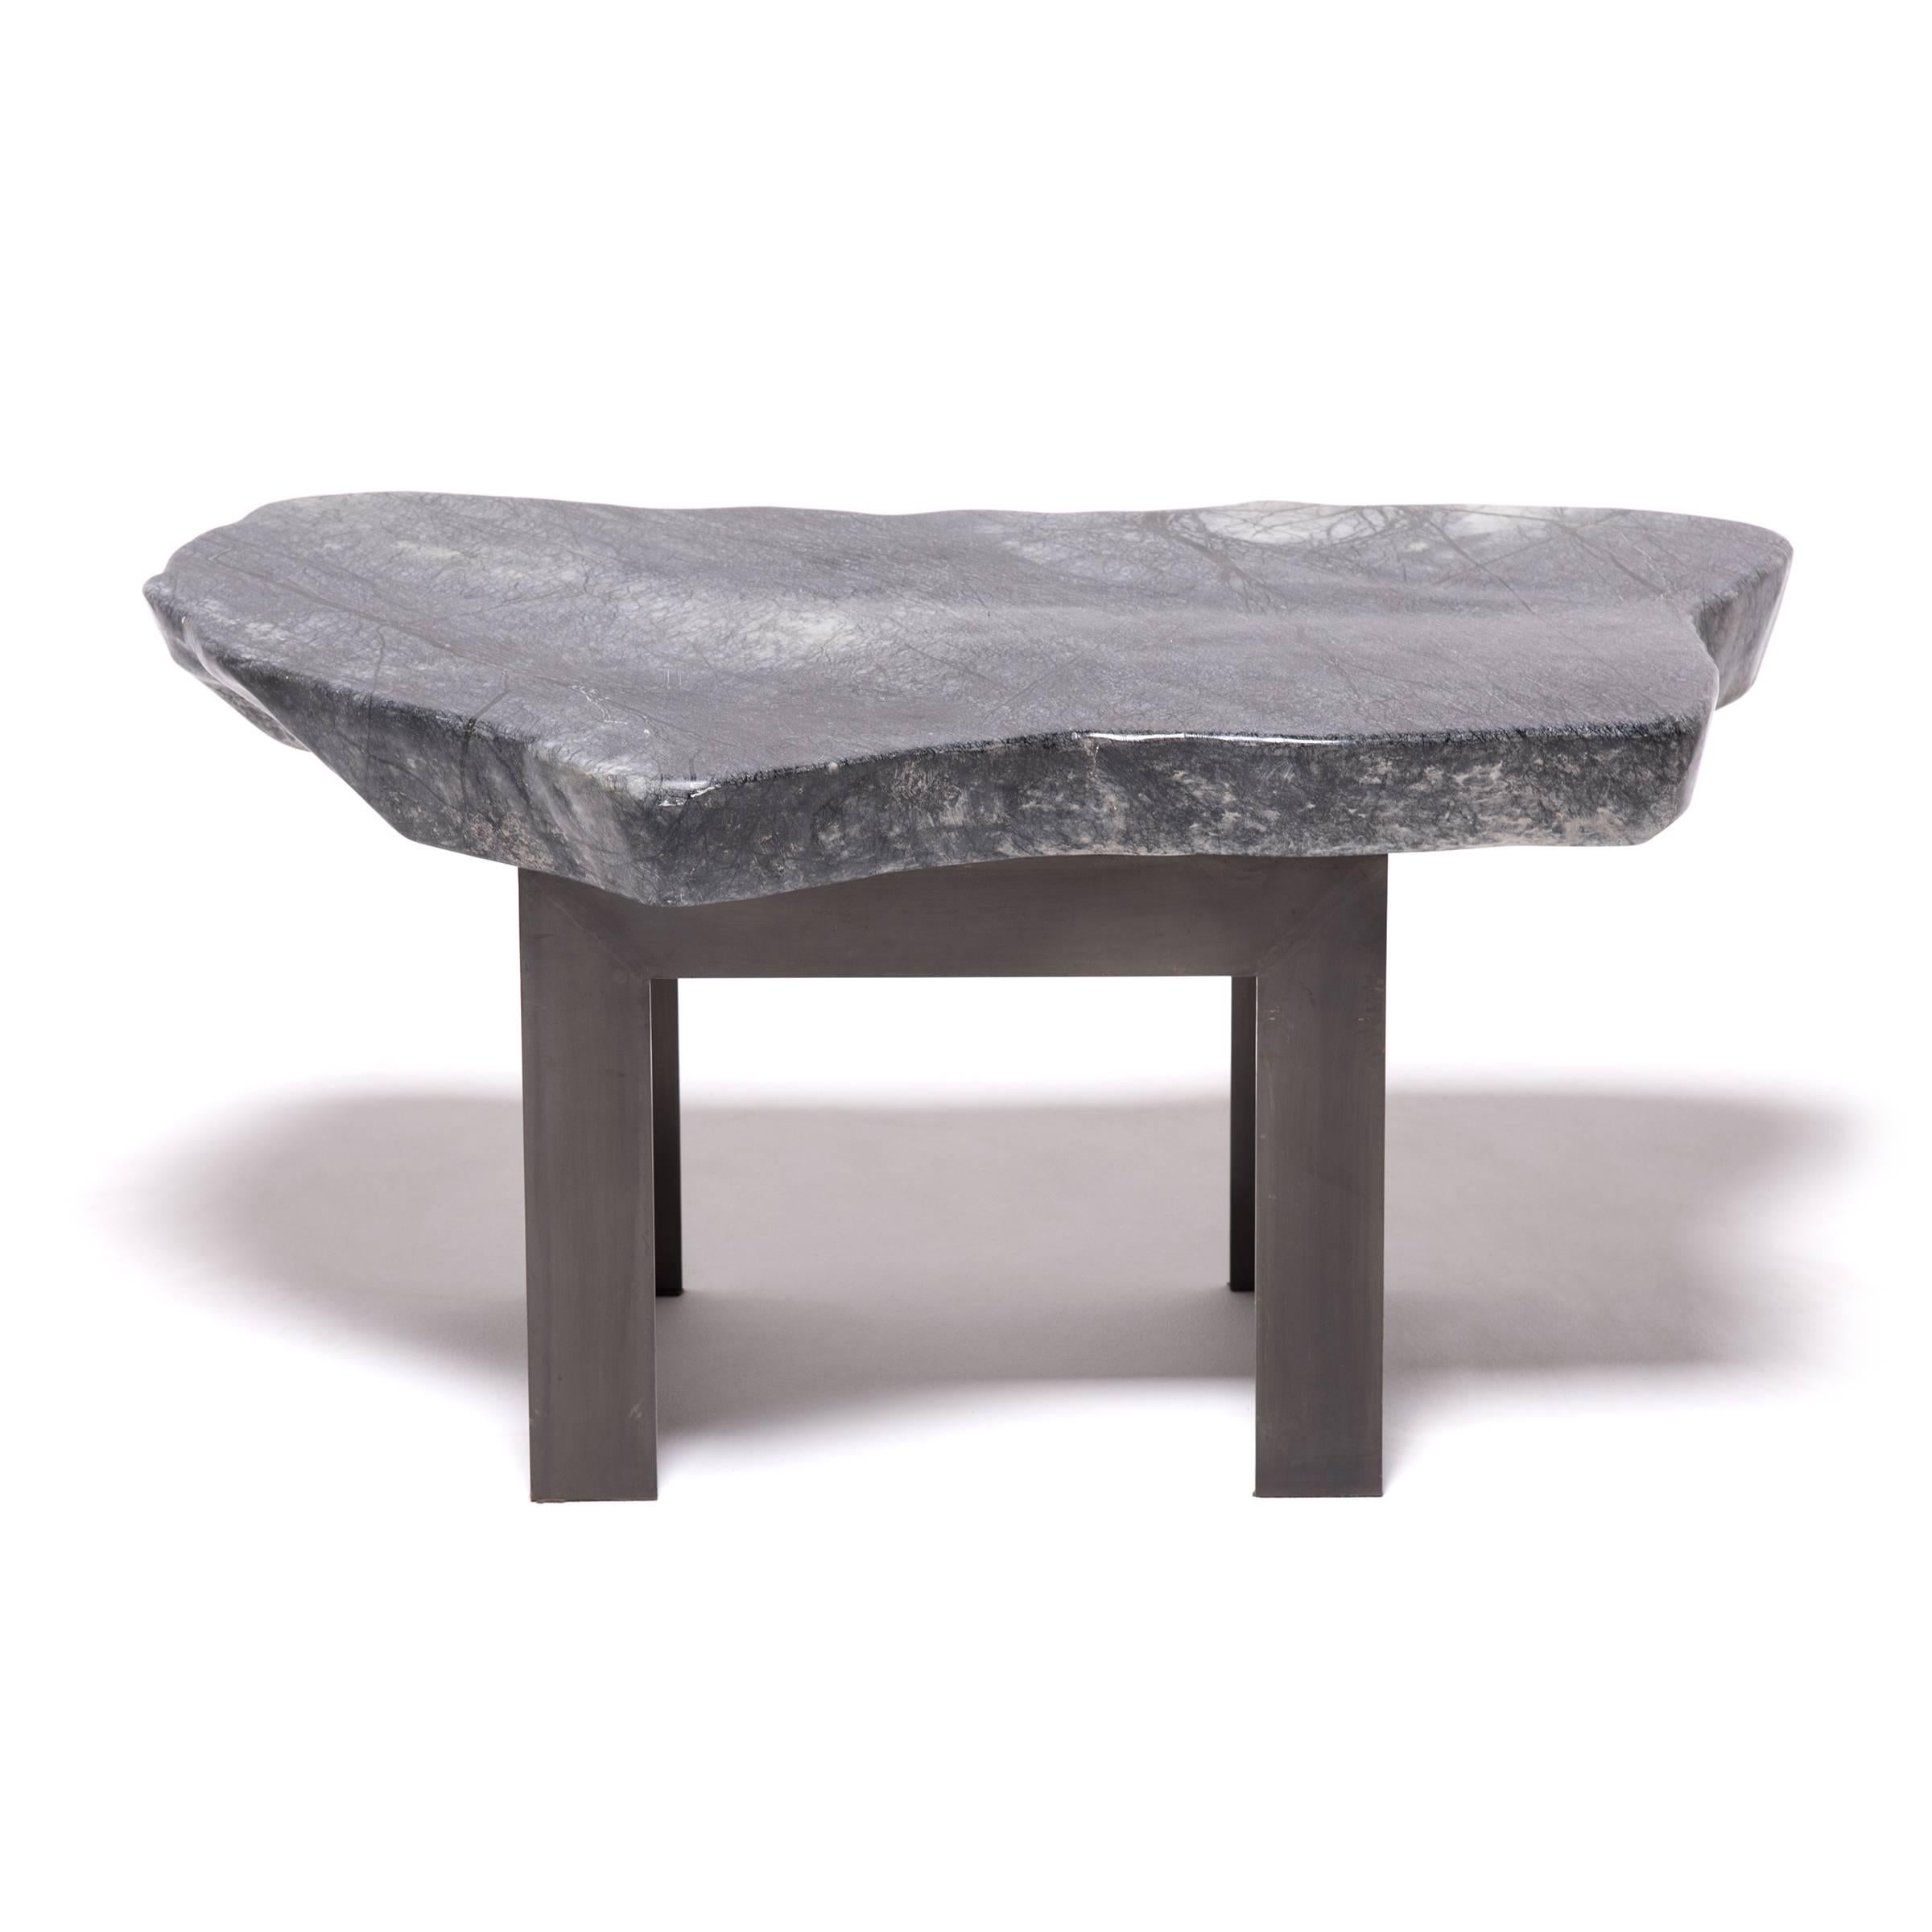 Prized by ancient scholars, meditation stones provided inspiration for poetry, painted landscapes, or brushed calligraphy. Supported by a custom Parson’s-style steel base, this organically shaped stone top is marked by spidery veins of black that